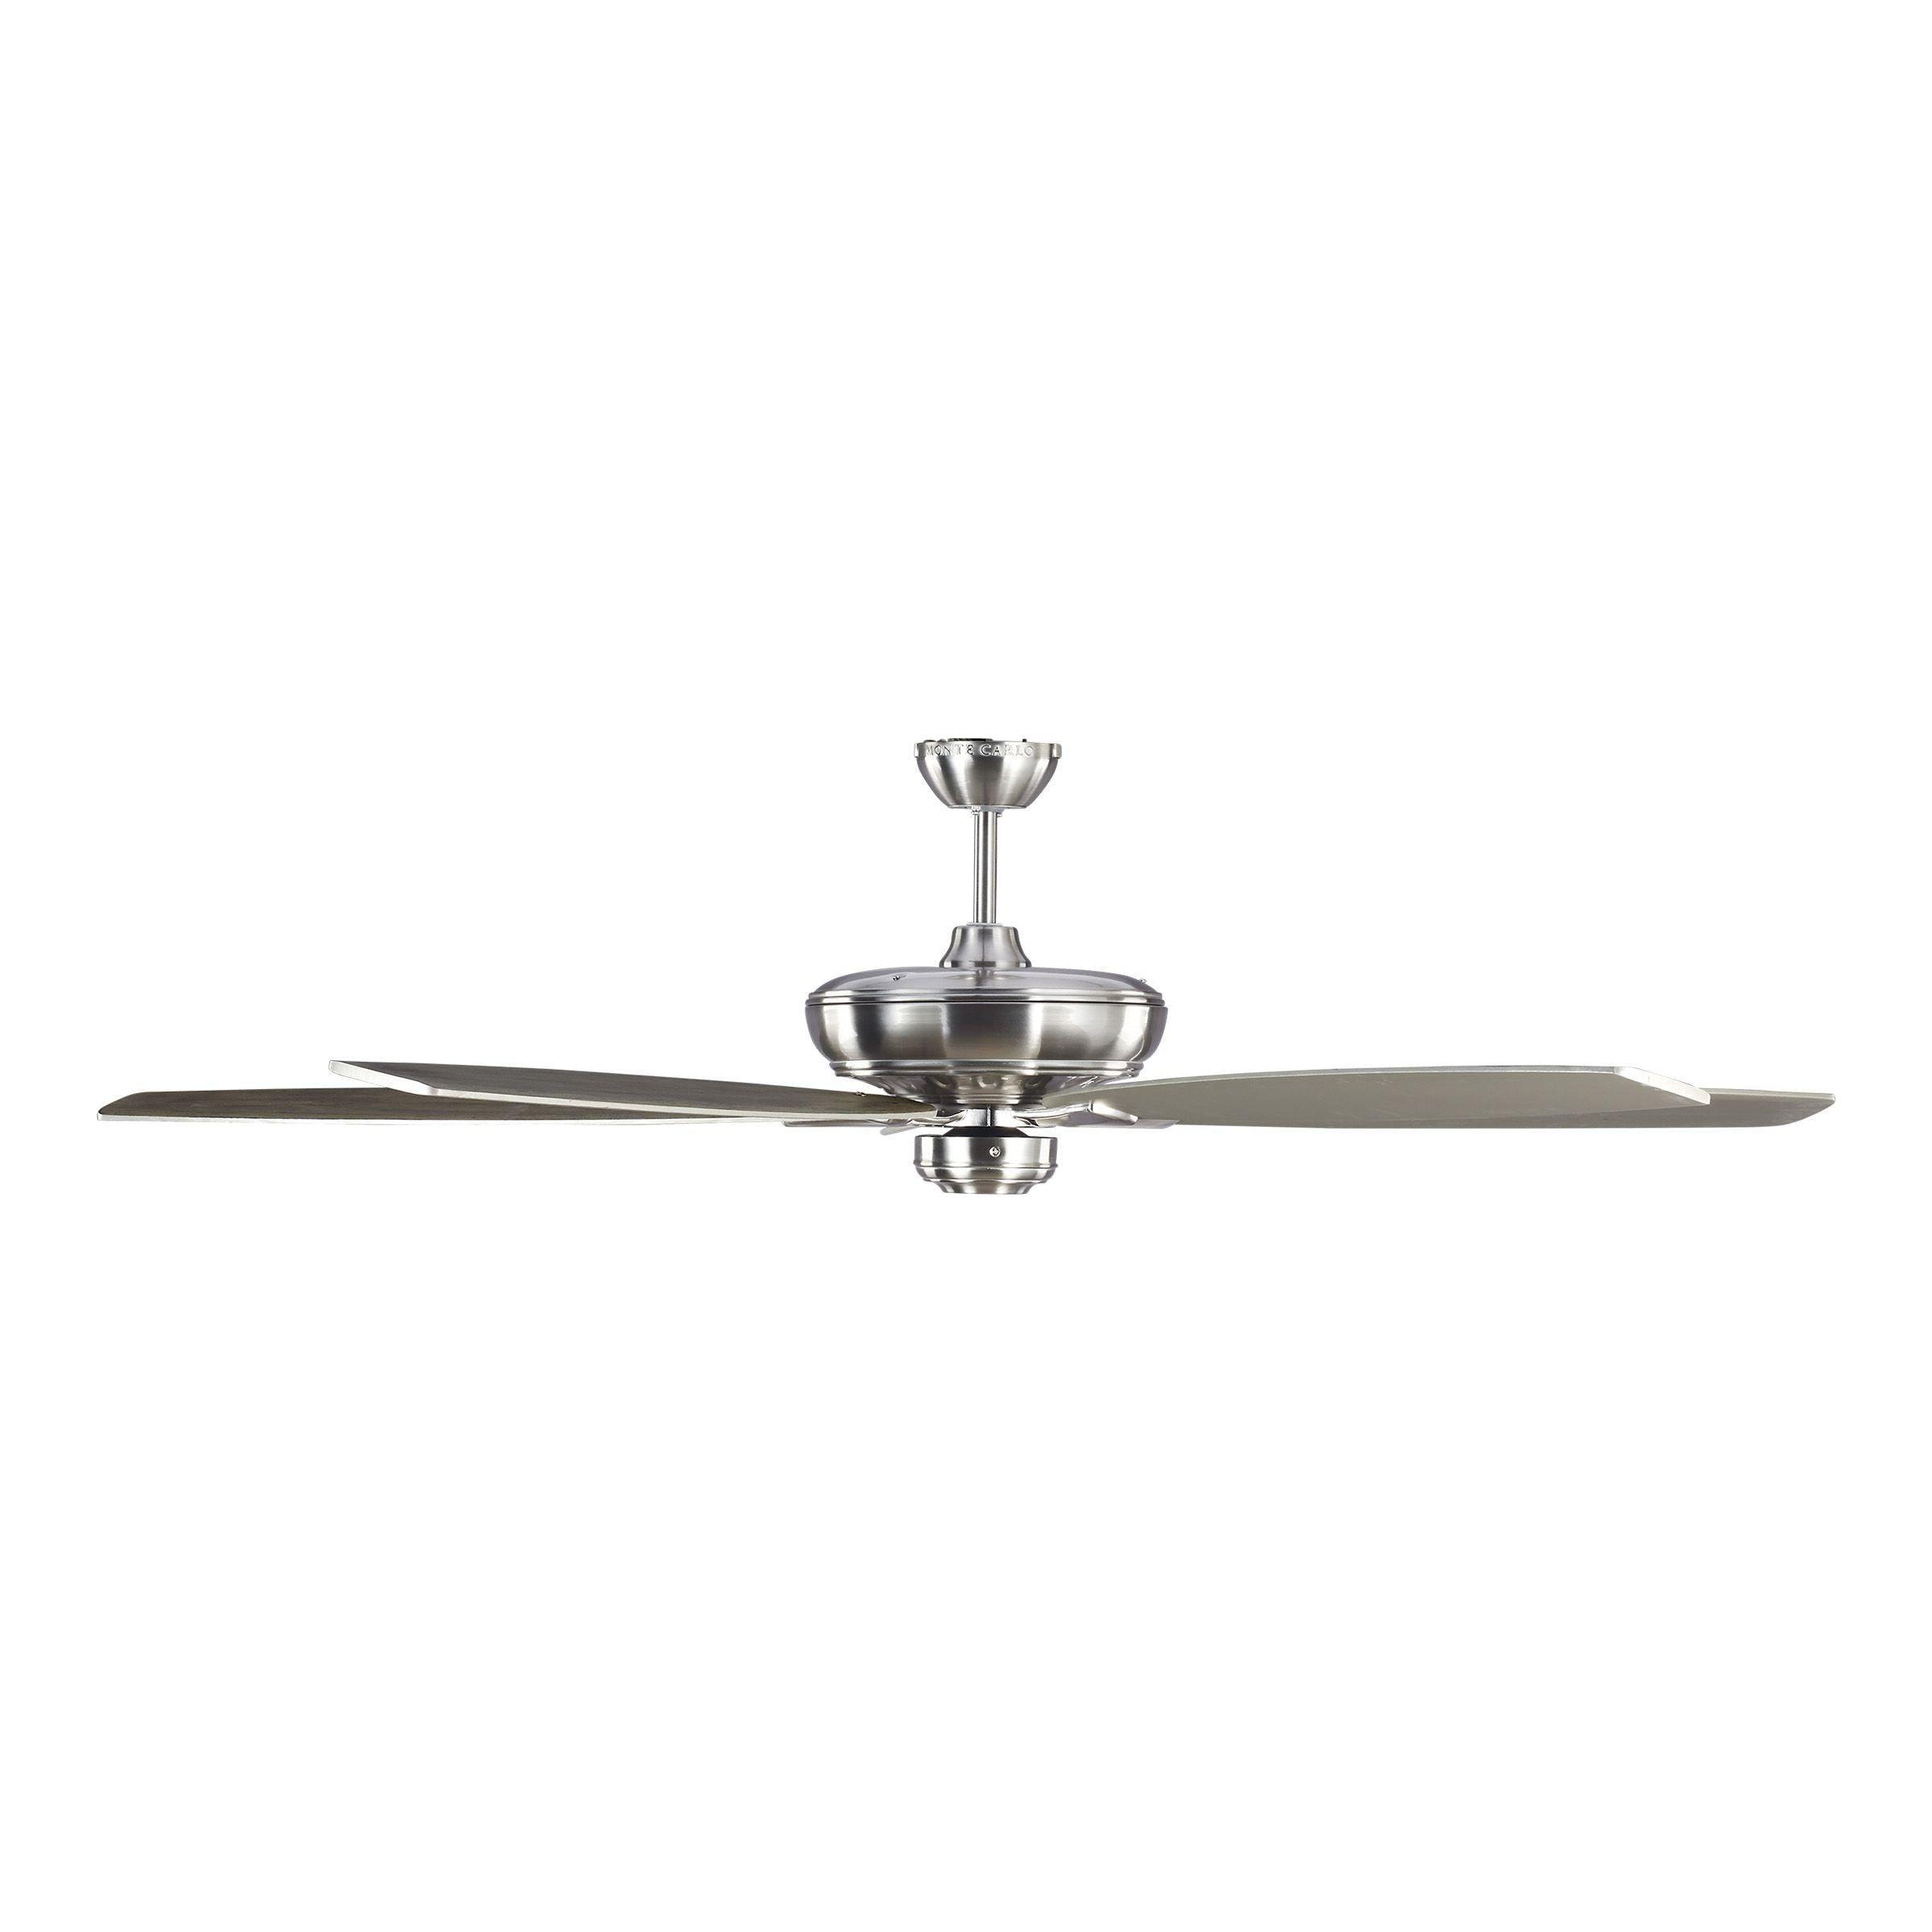 Visual Comfort Fan Collection - Dover 68 Ceiling Fan - Lights Canada